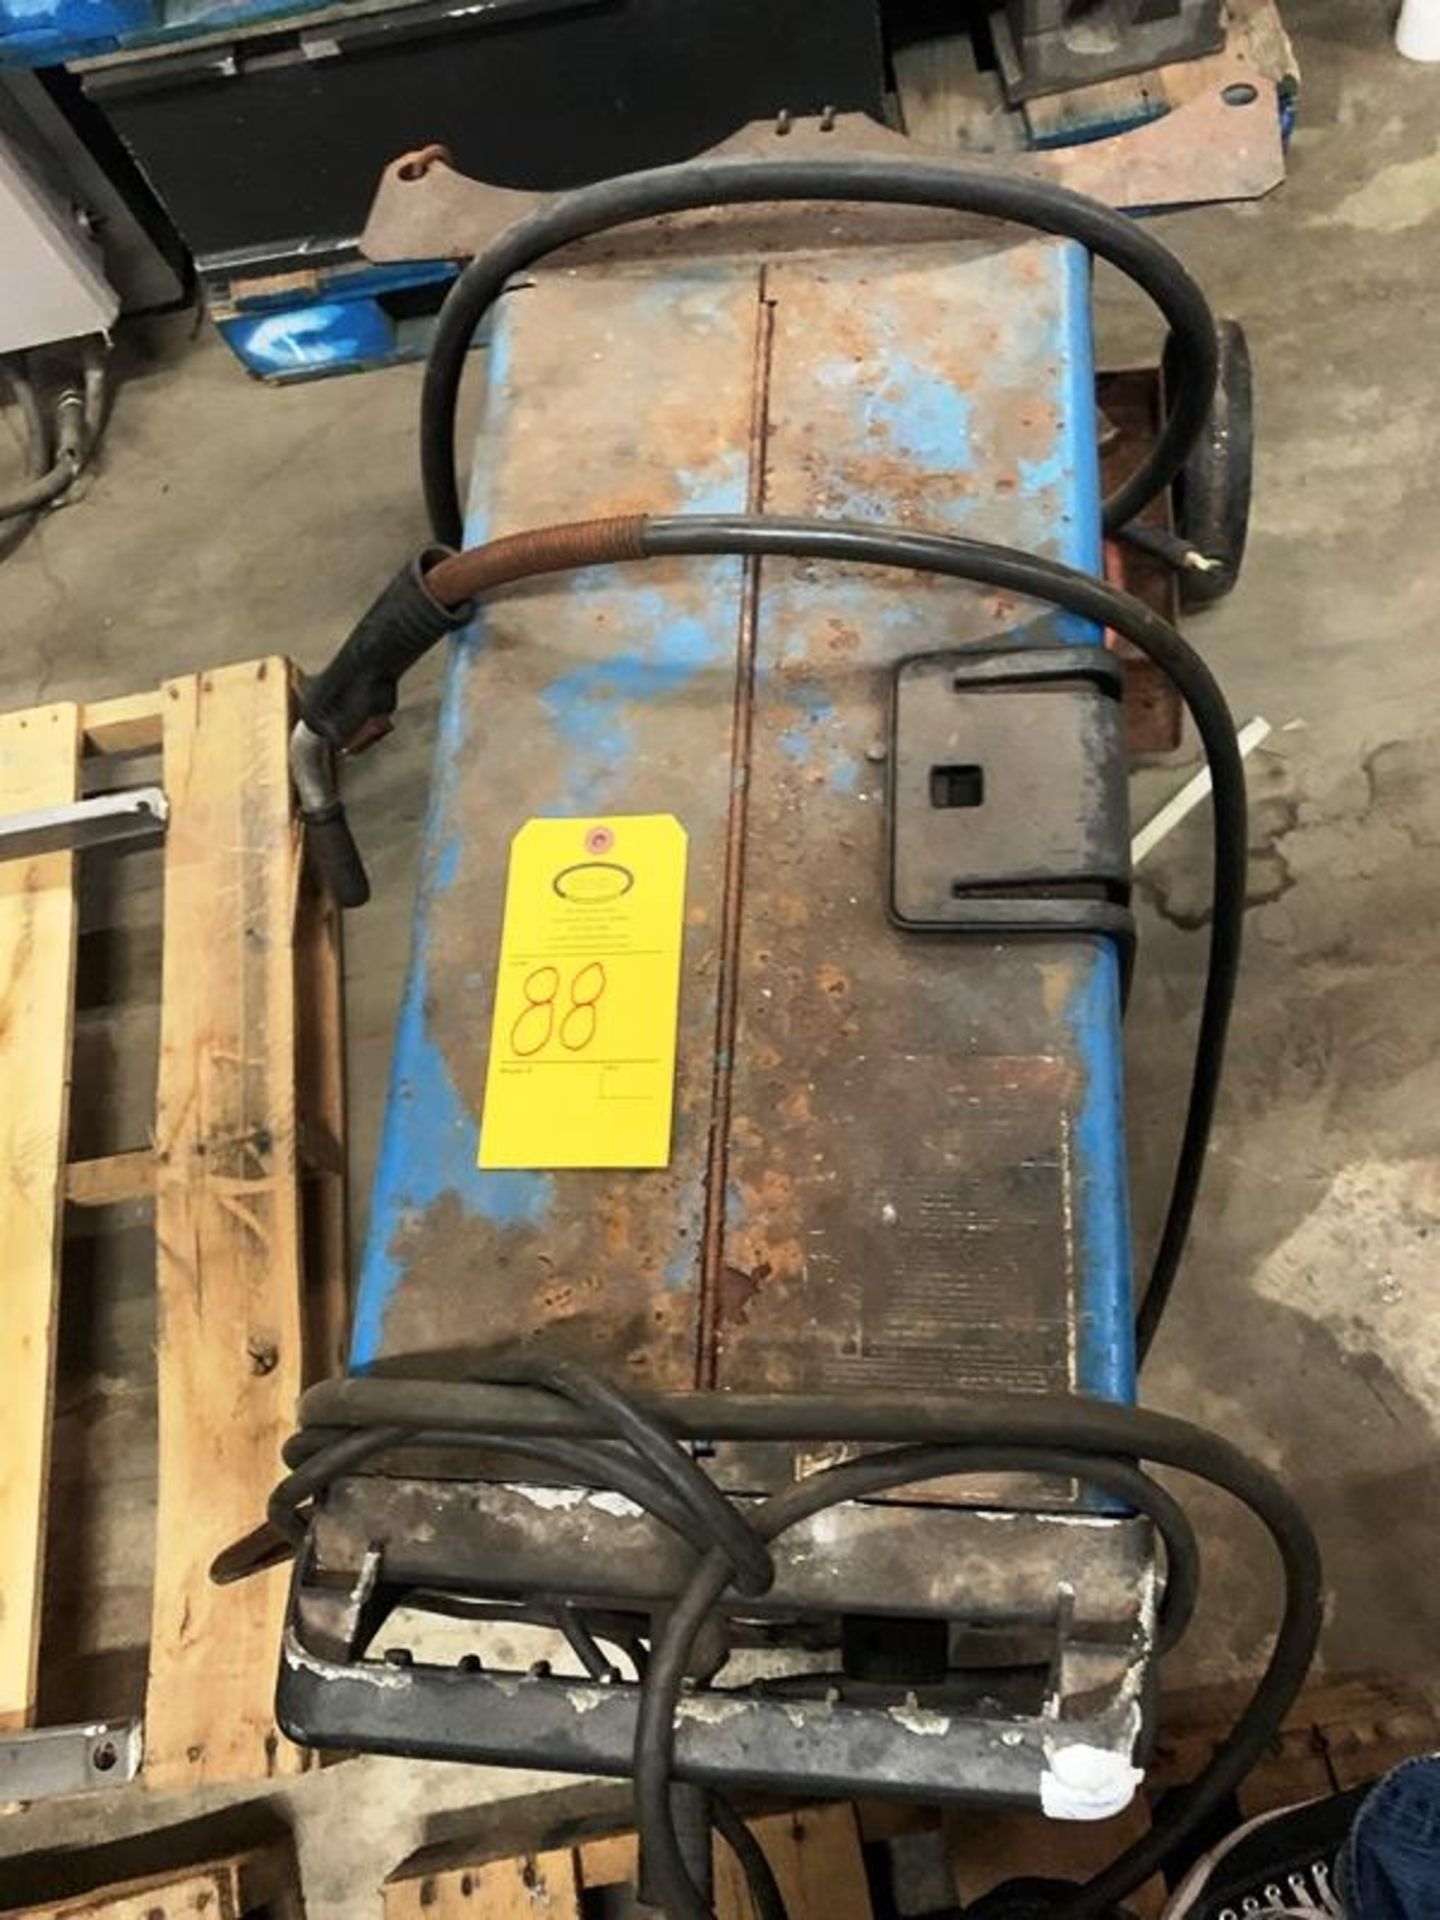 Miller Matic 251 Welder, Ser. #LB242869m 200/230 volts, 1 phase (Located in Sandwich, IL)